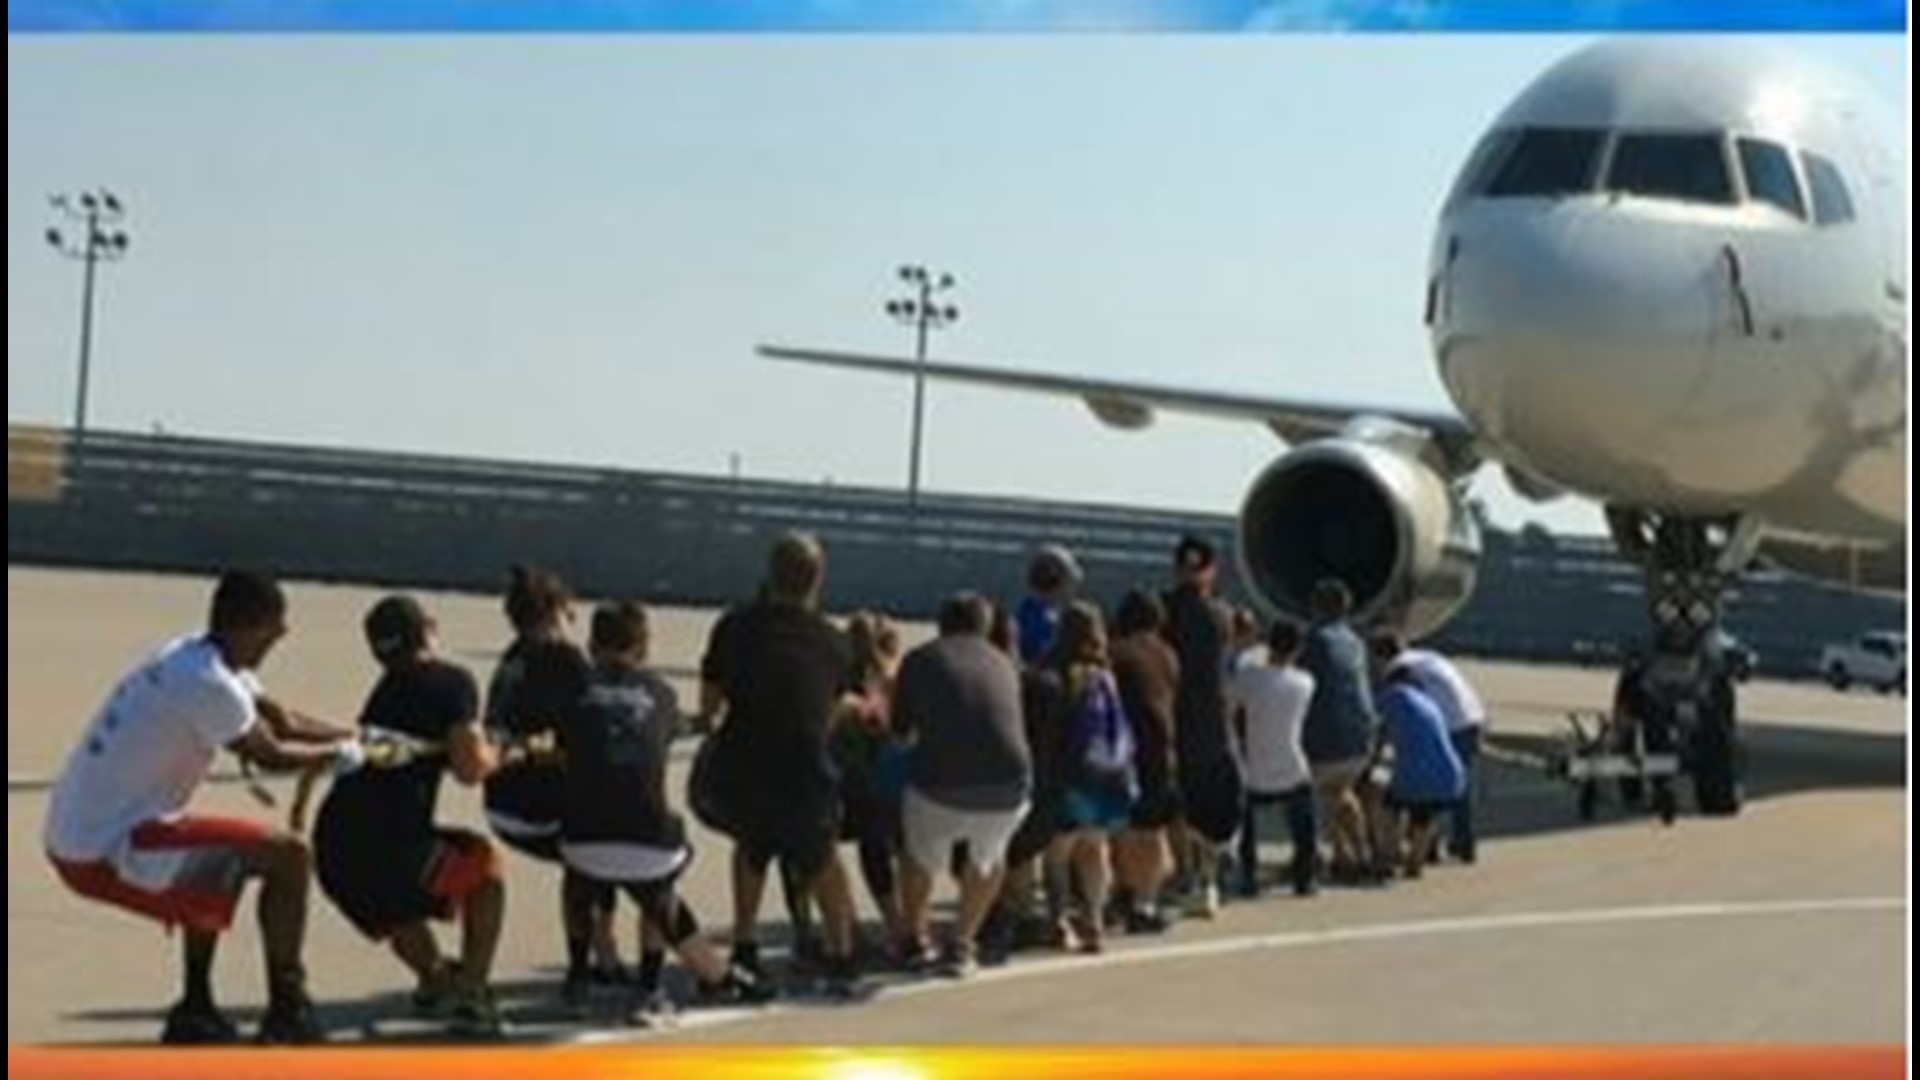 The UPS Plane Pull is Saturday, September 21, 2019 at 10 AM at UPS WorldPort, which is located at 911 Grade Lane in Louisville, KY.